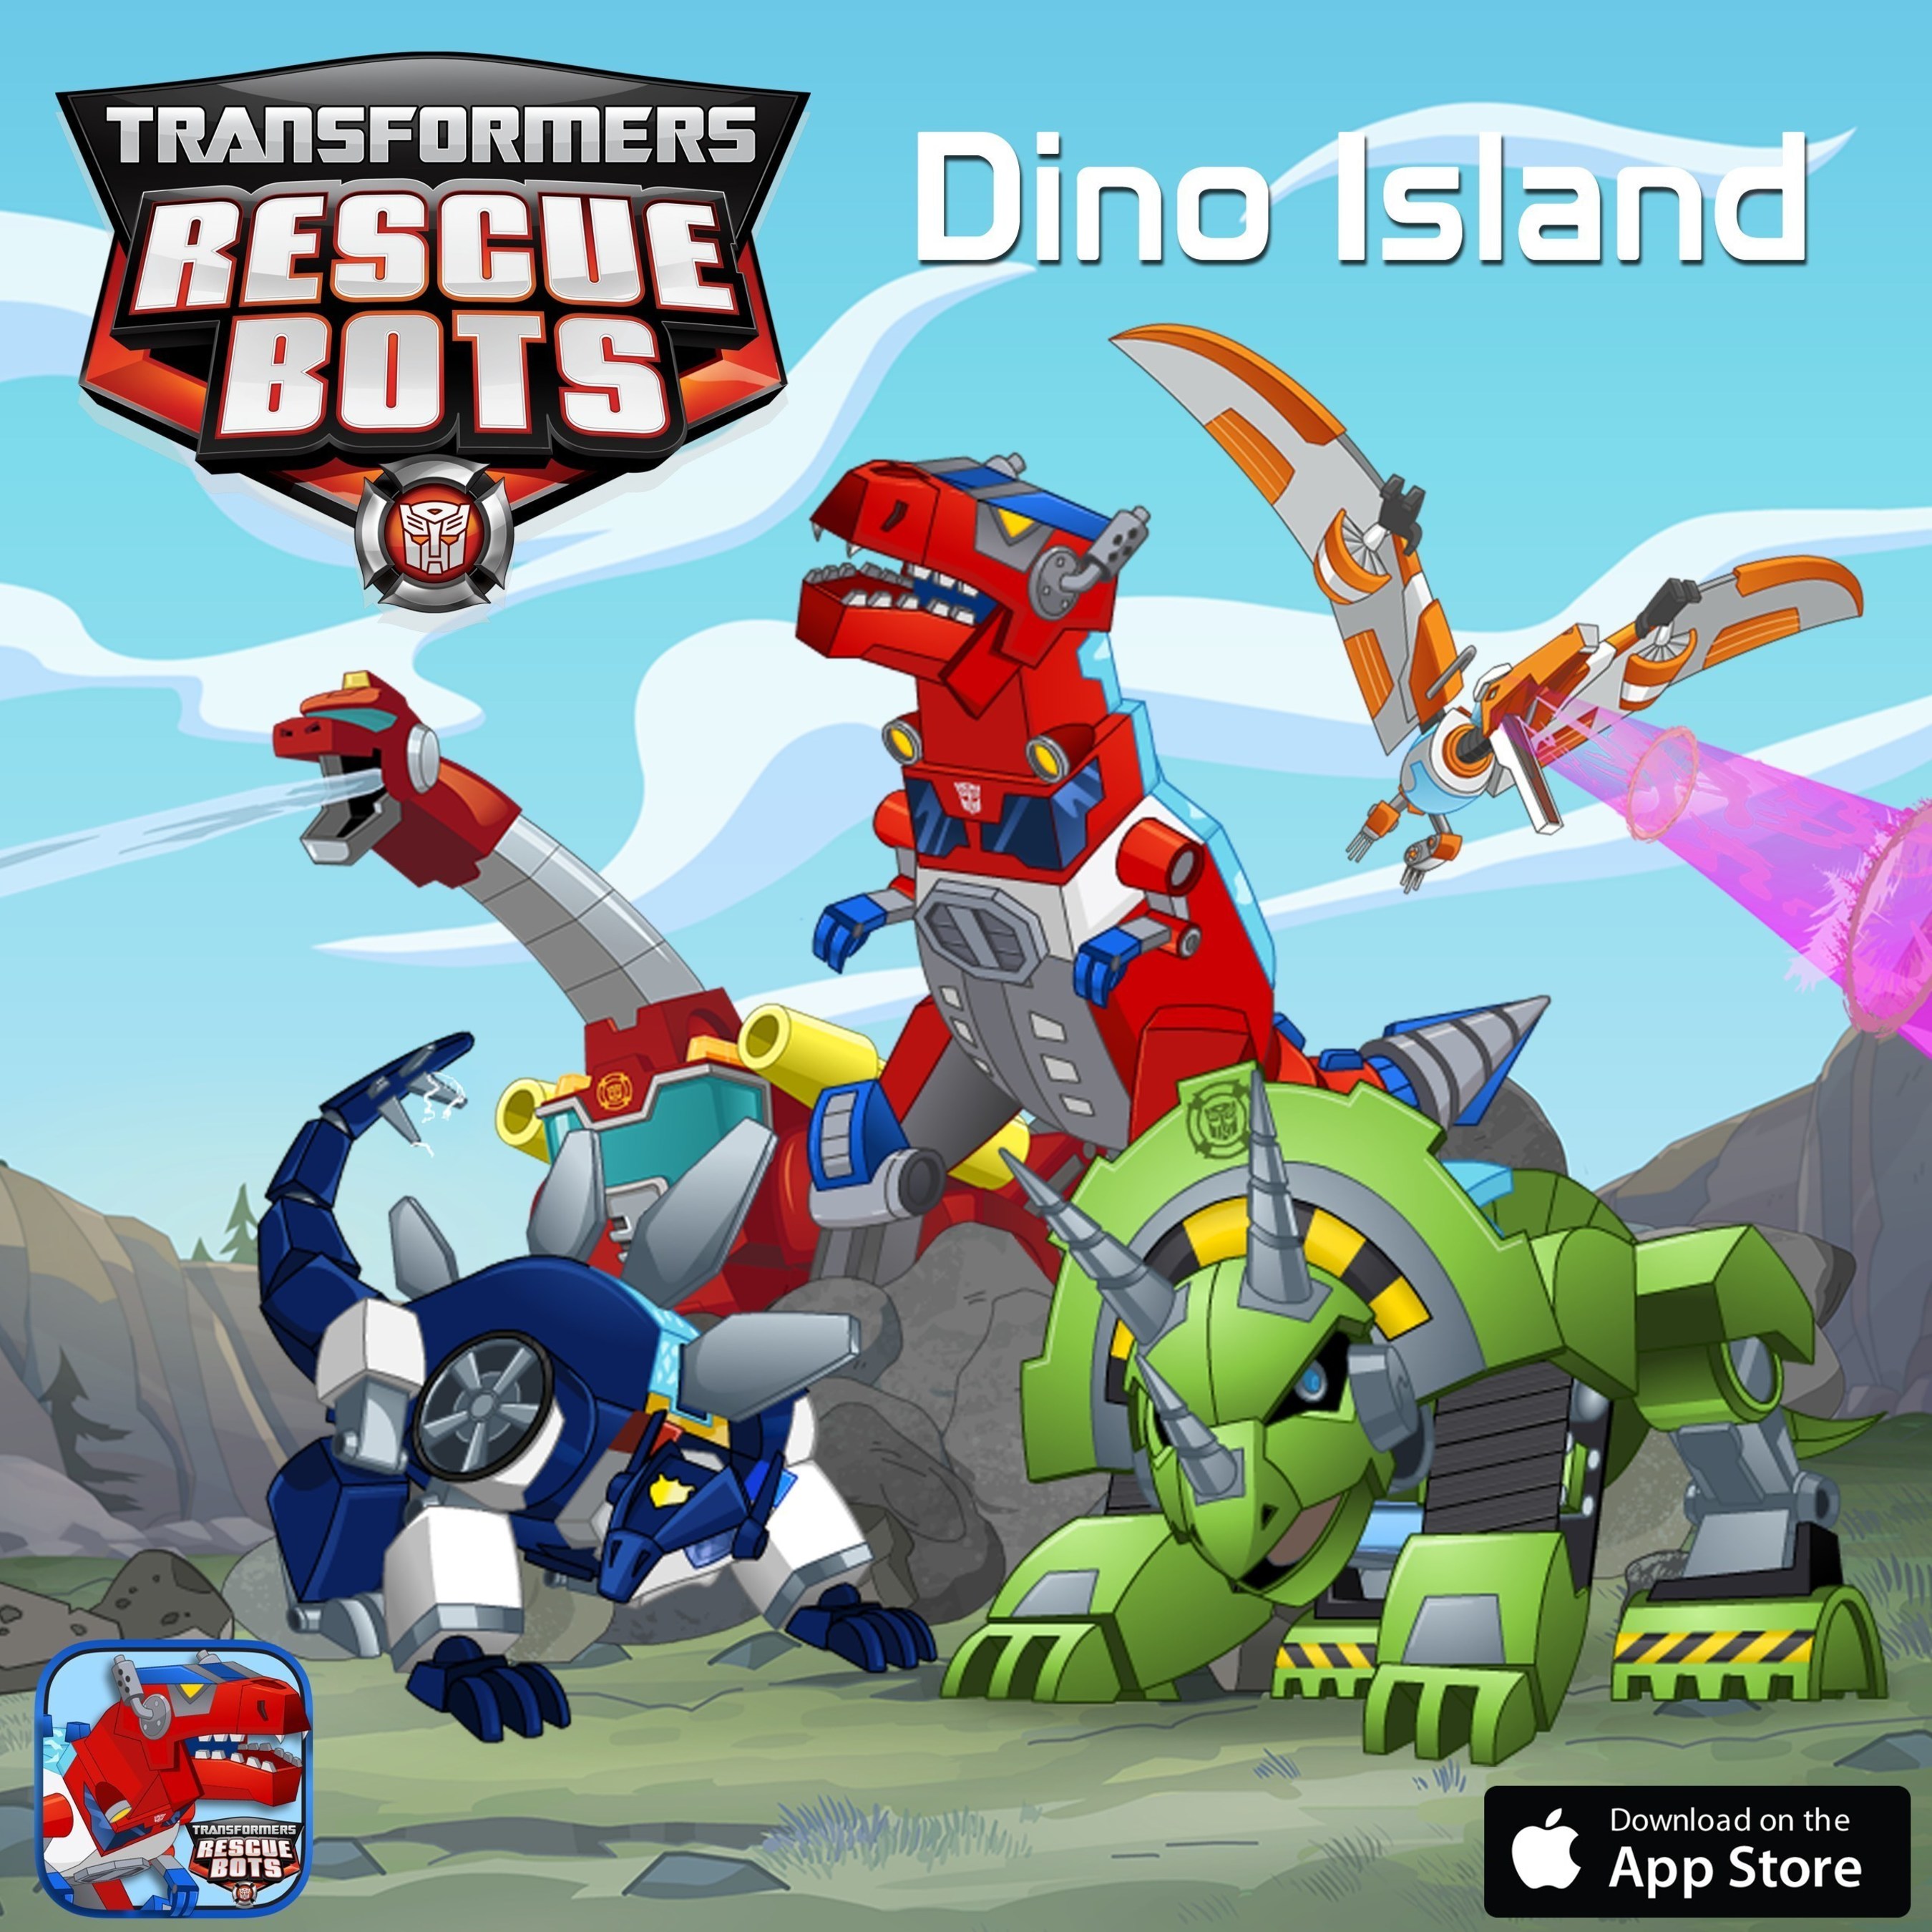 TRANSFORMERS RESCUE BOTS Roar to the Rescue in Hasbro and PlayDate  Digital's New DINO ISLAND Interactive Storybook App